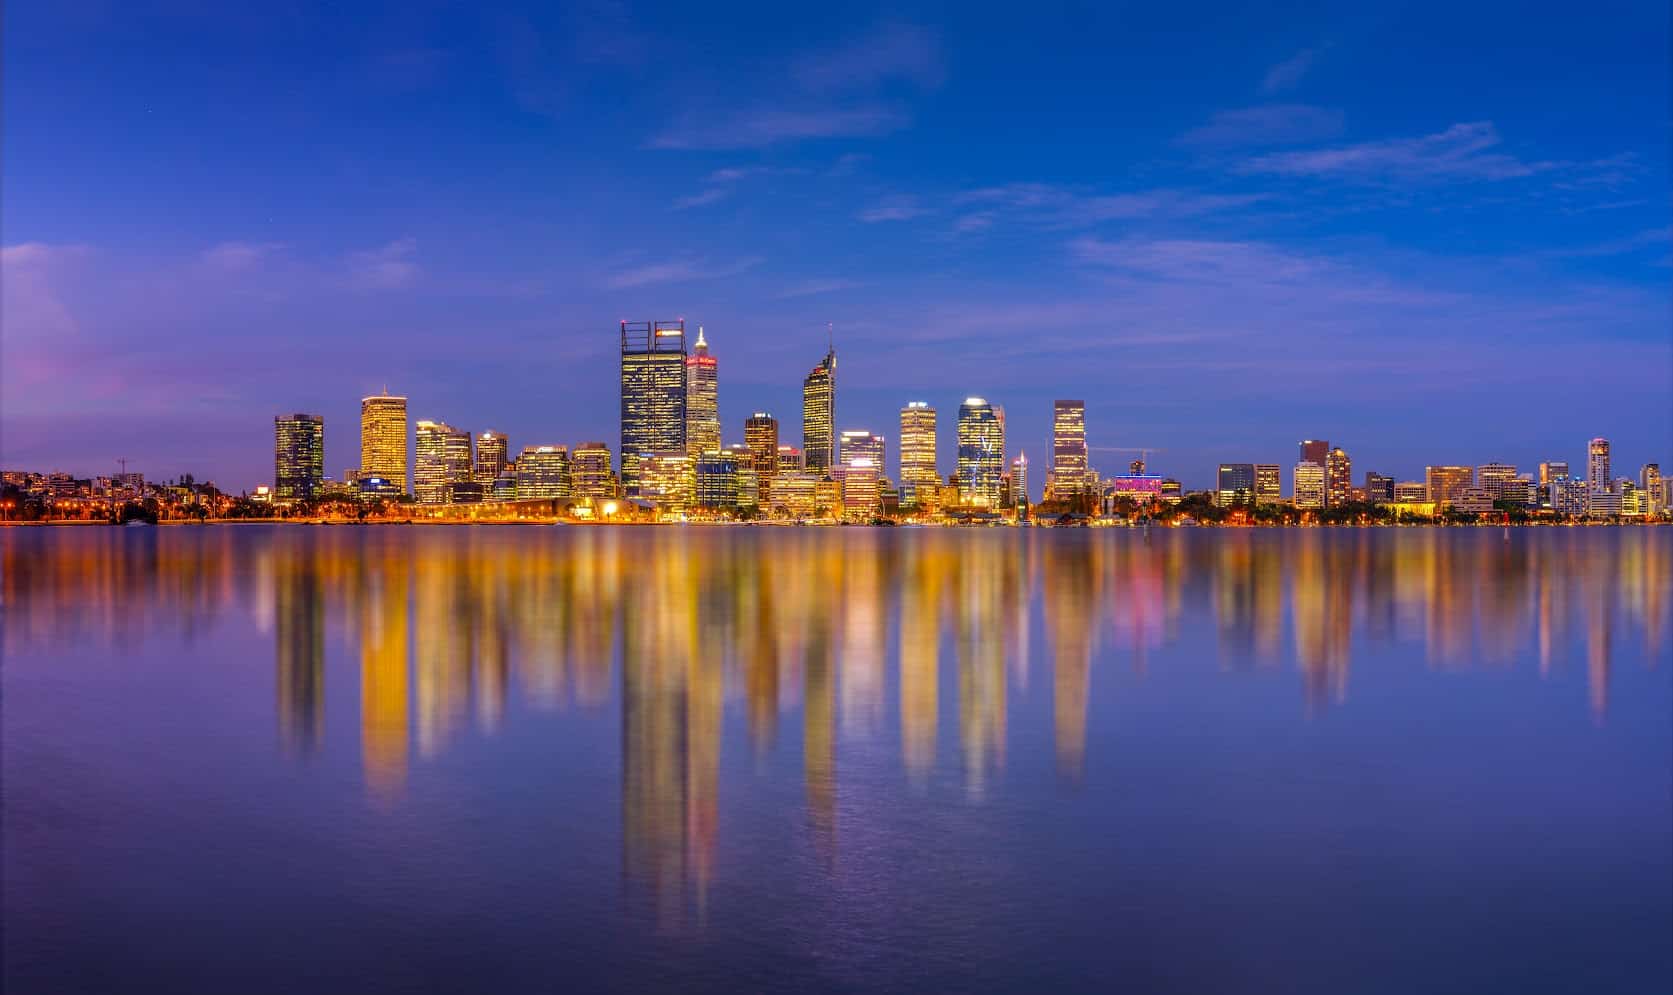 View of the Perth City Skyline from South Perth.